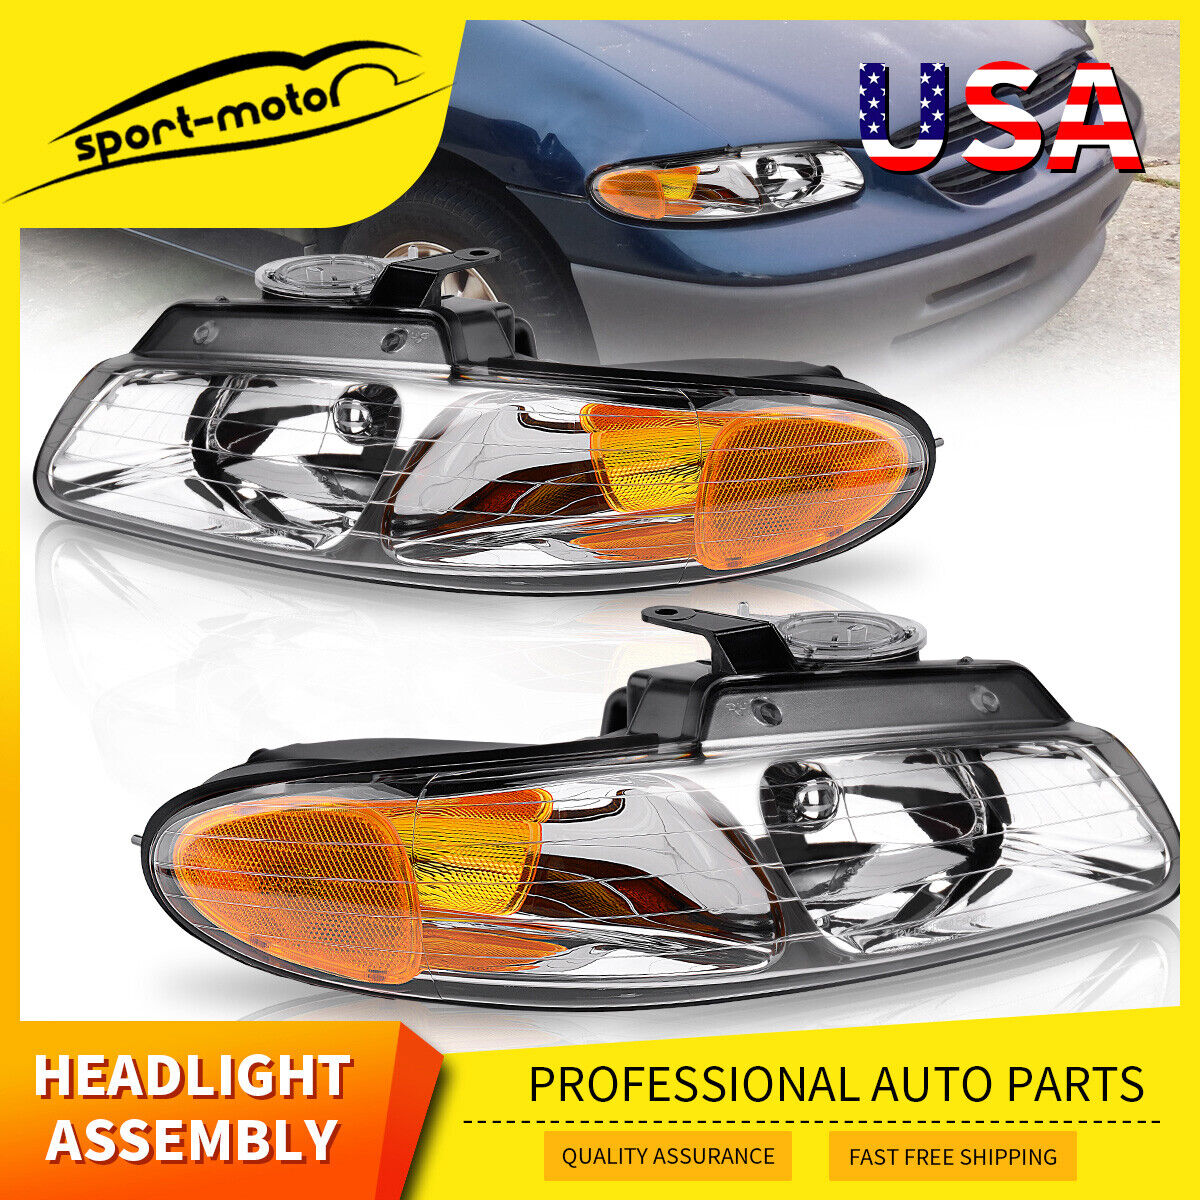 Headlights LH+RH Fit for 1996-2000 Dodge Caravan Chrysler Town & Country Voyager